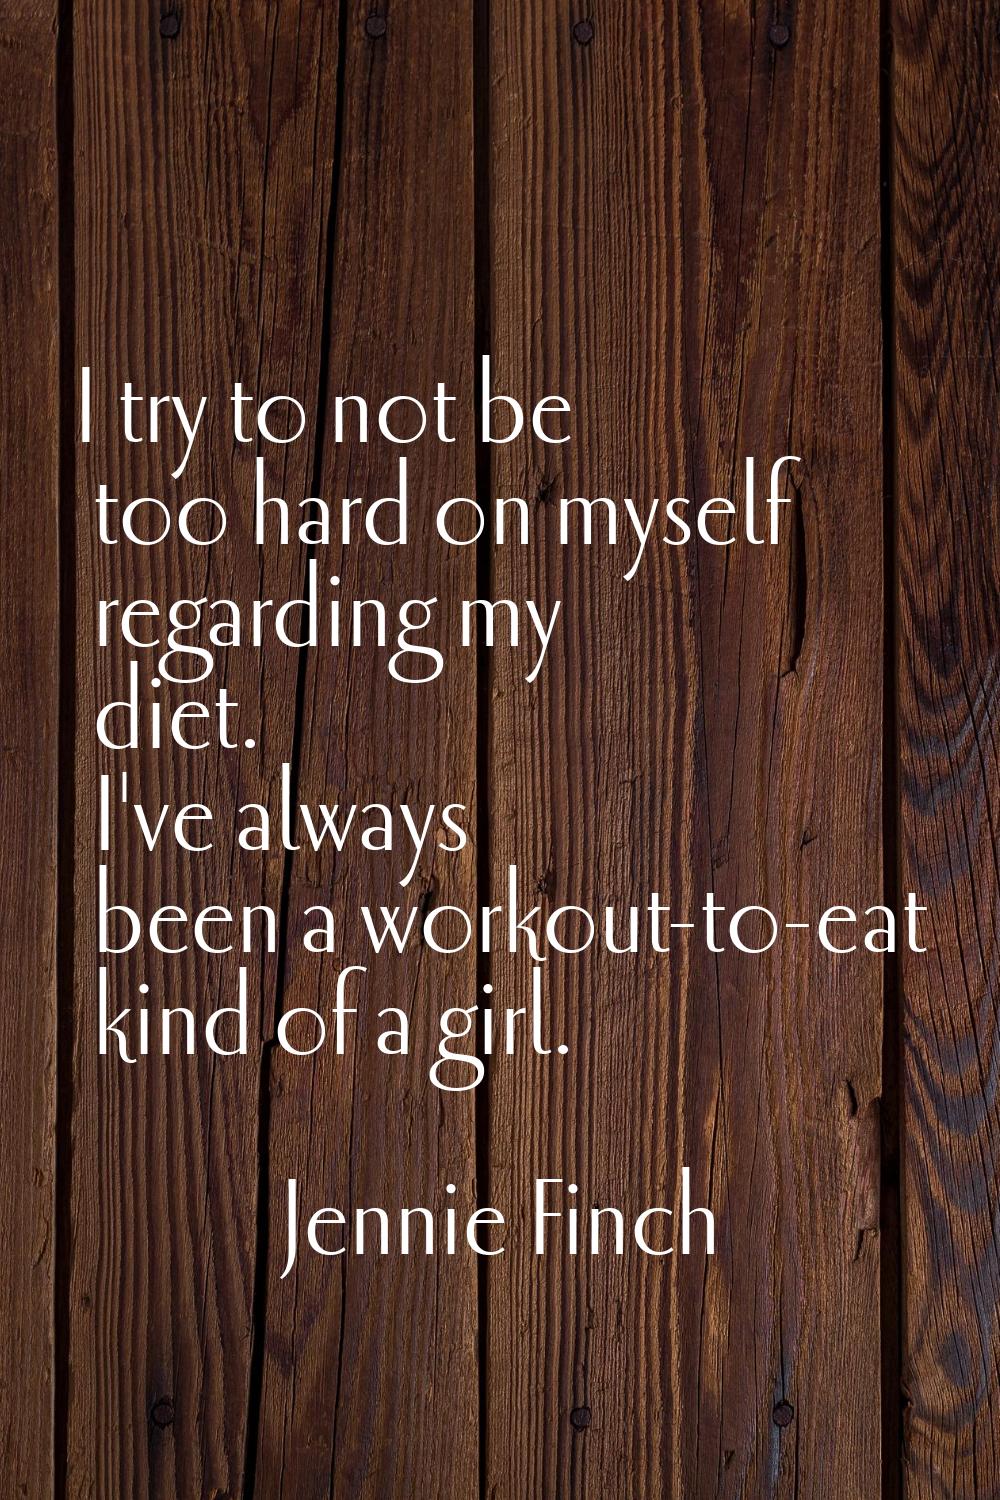 I try to not be too hard on myself regarding my diet. I've always been a workout-to-eat kind of a g